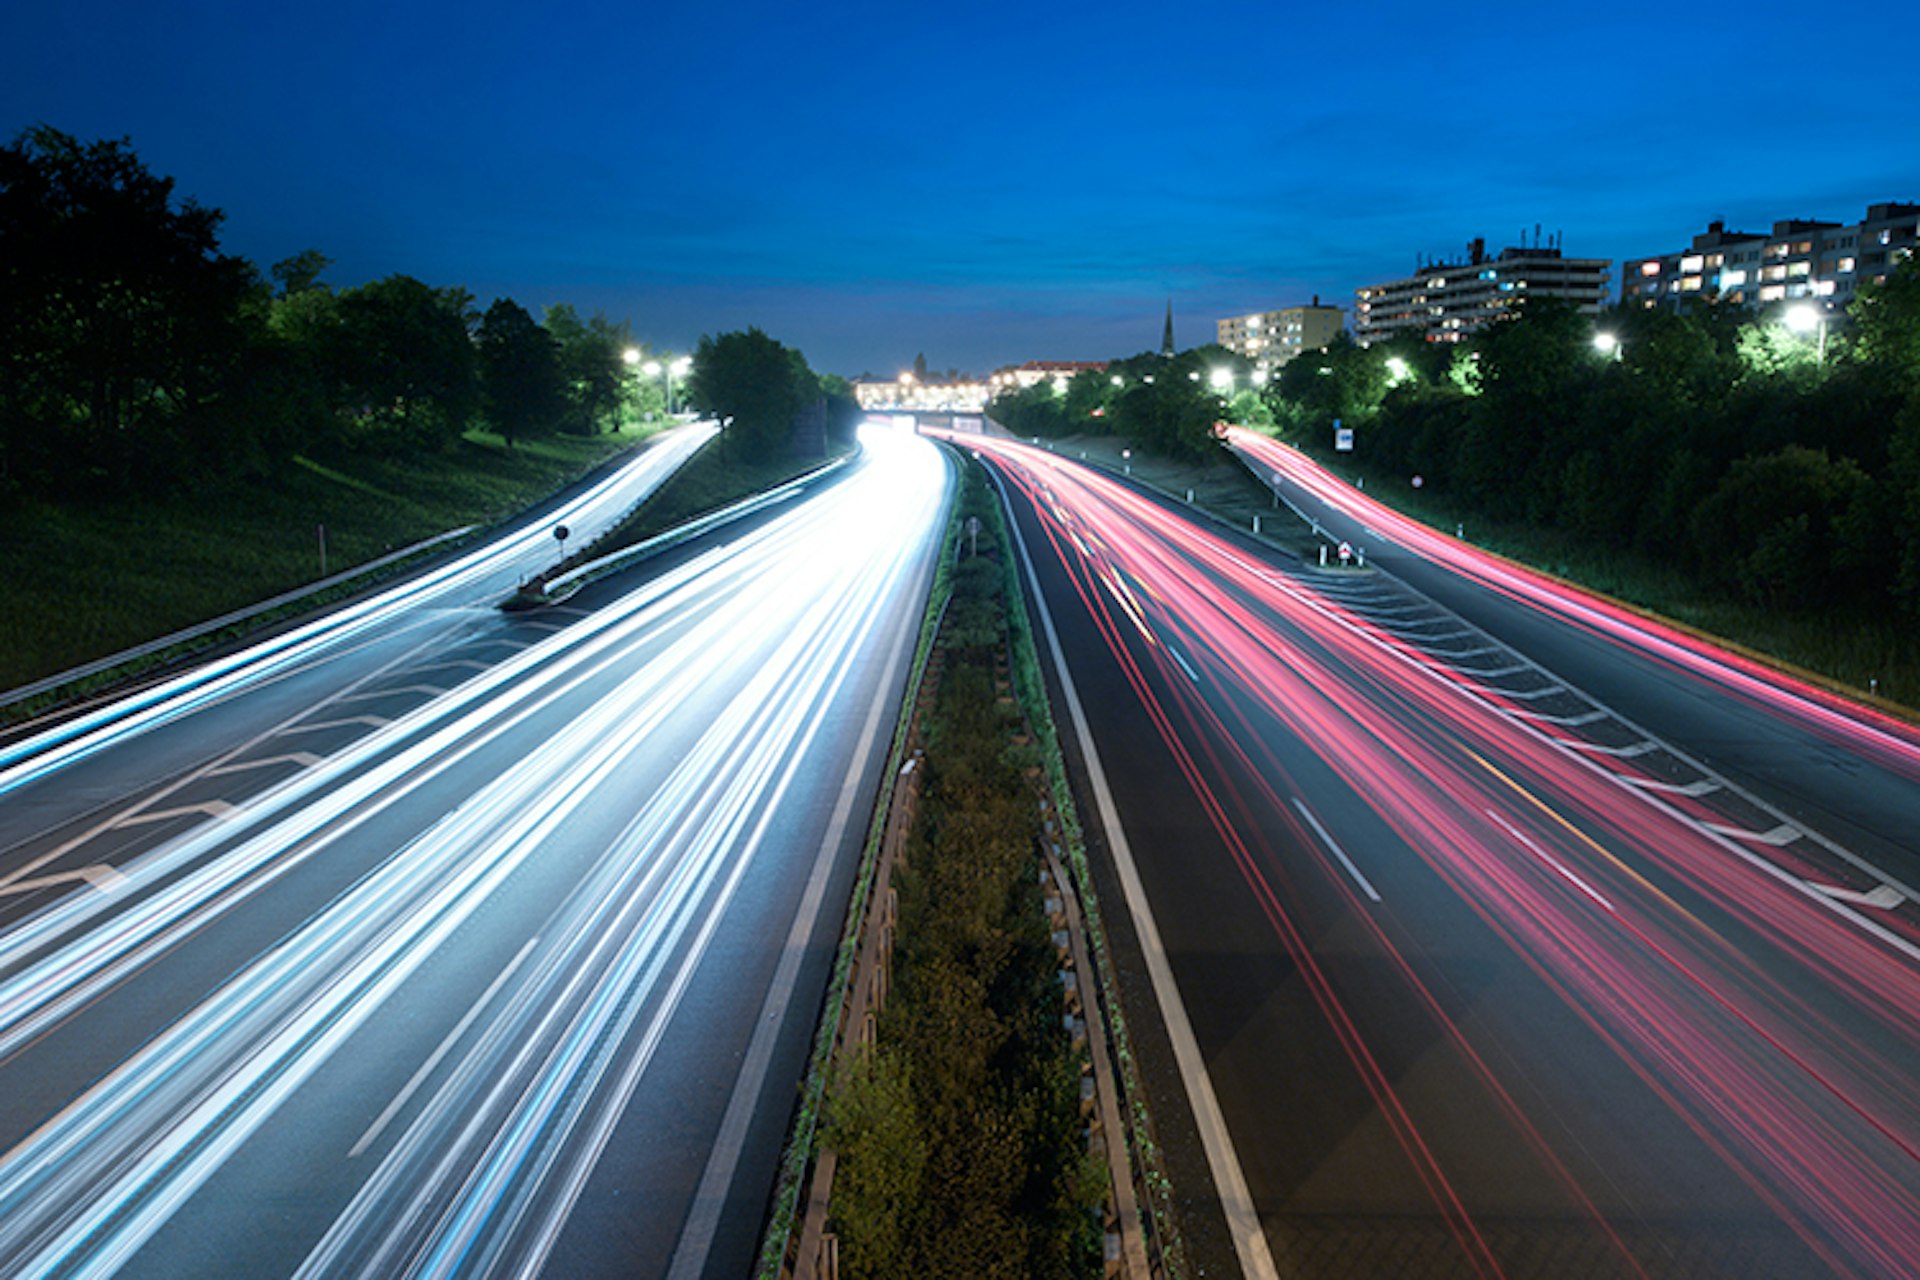 Provided no one is chasing you, Germany's autobahns are a driver's delight. Image by daitoZen / Moment / Getty Images